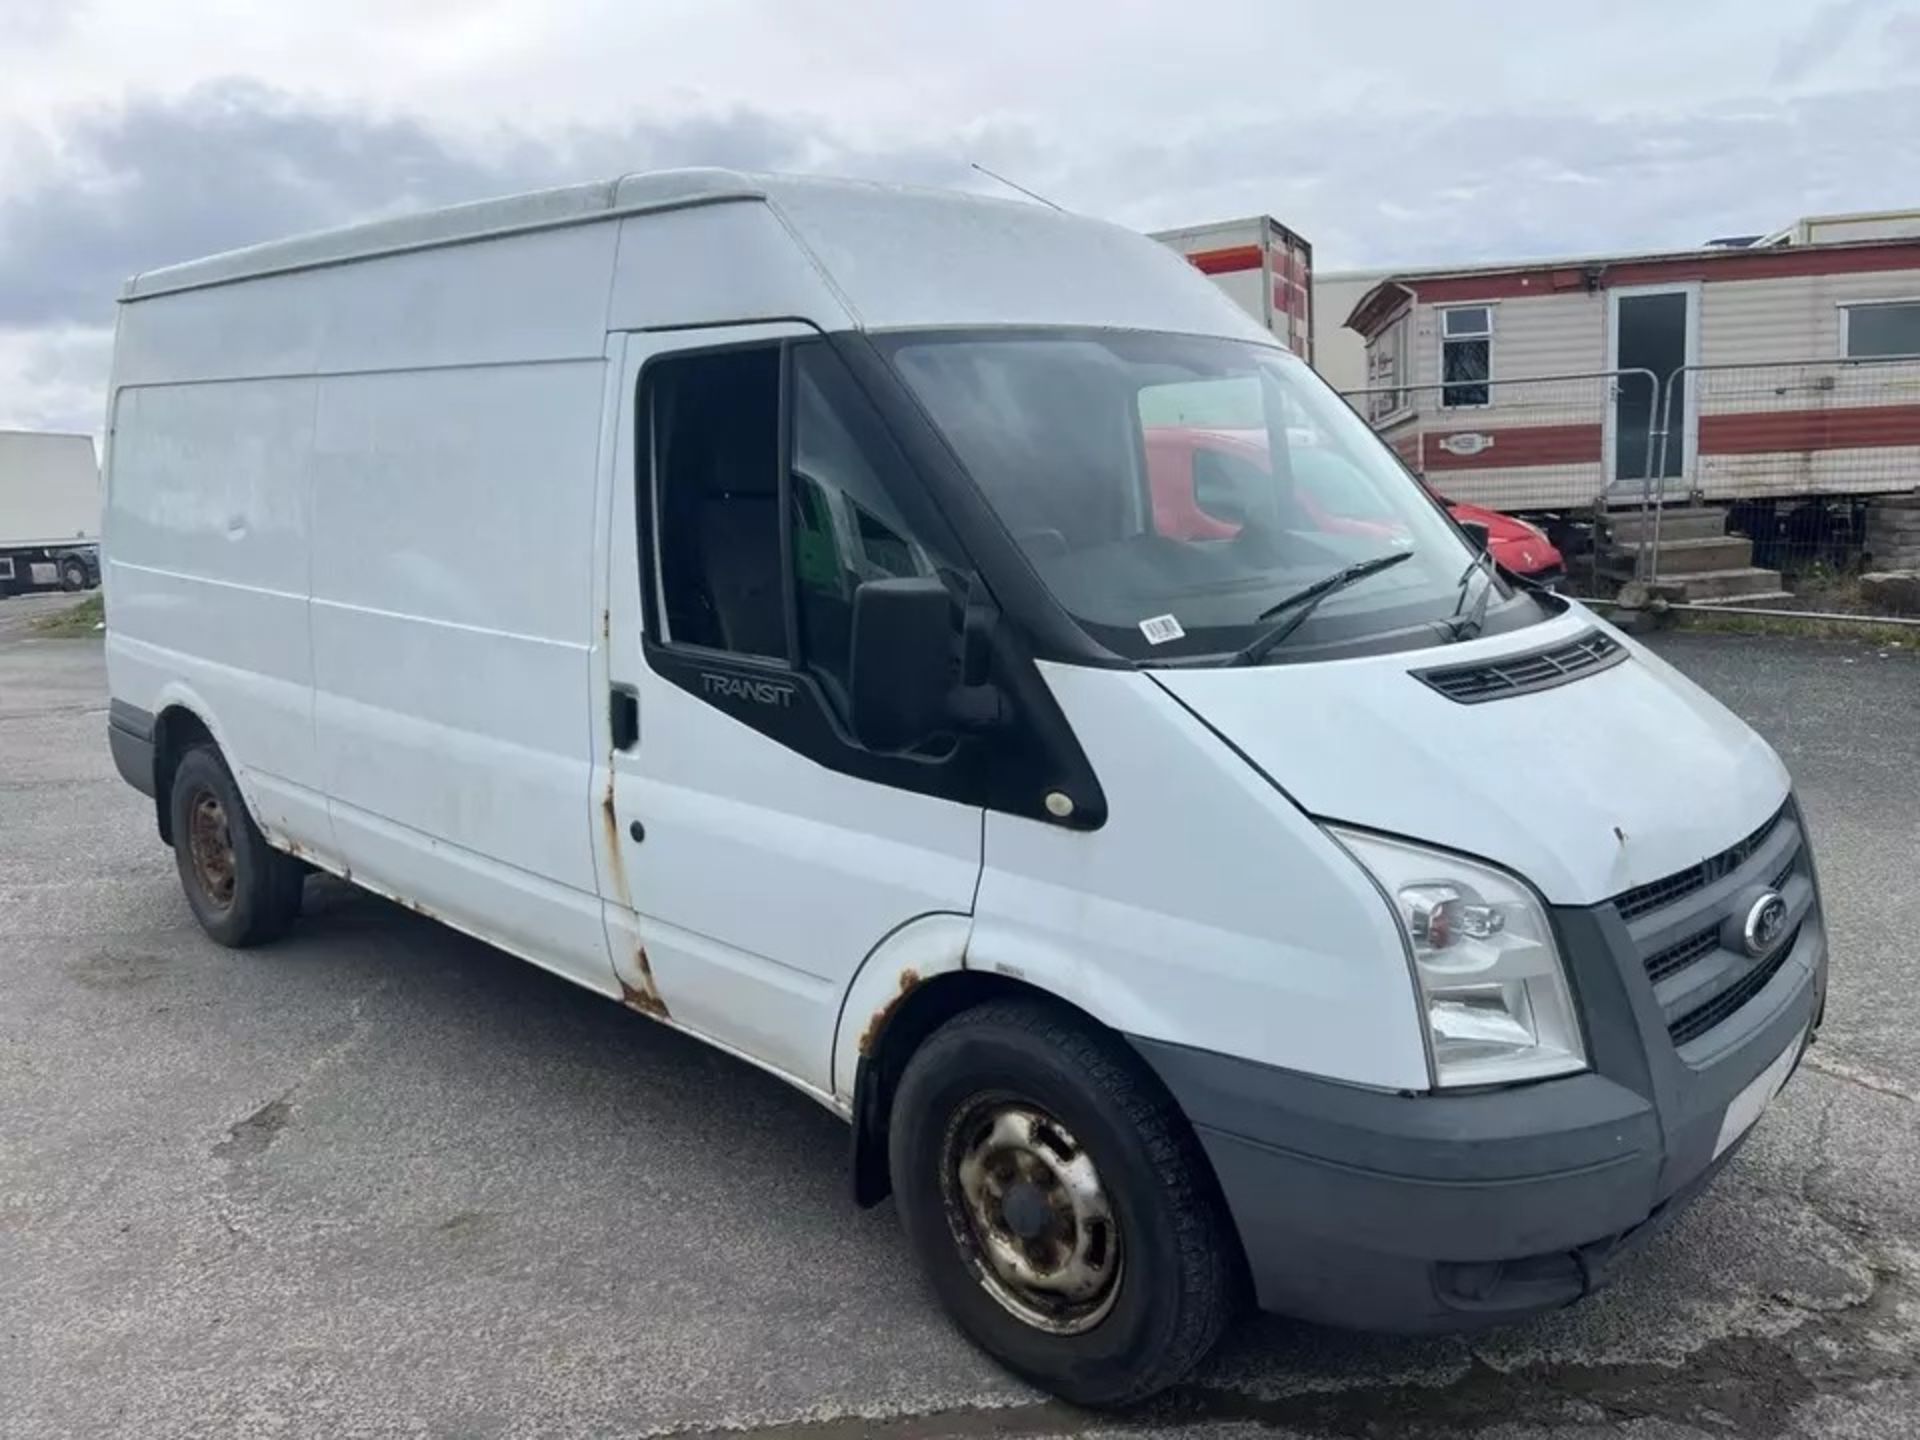 2011 FORD TRANSIT LWB PANEL VAN - IDEAL FOR REPAIR OR PARTS, 1 OWNER, HPI CLEAR - Image 13 of 20